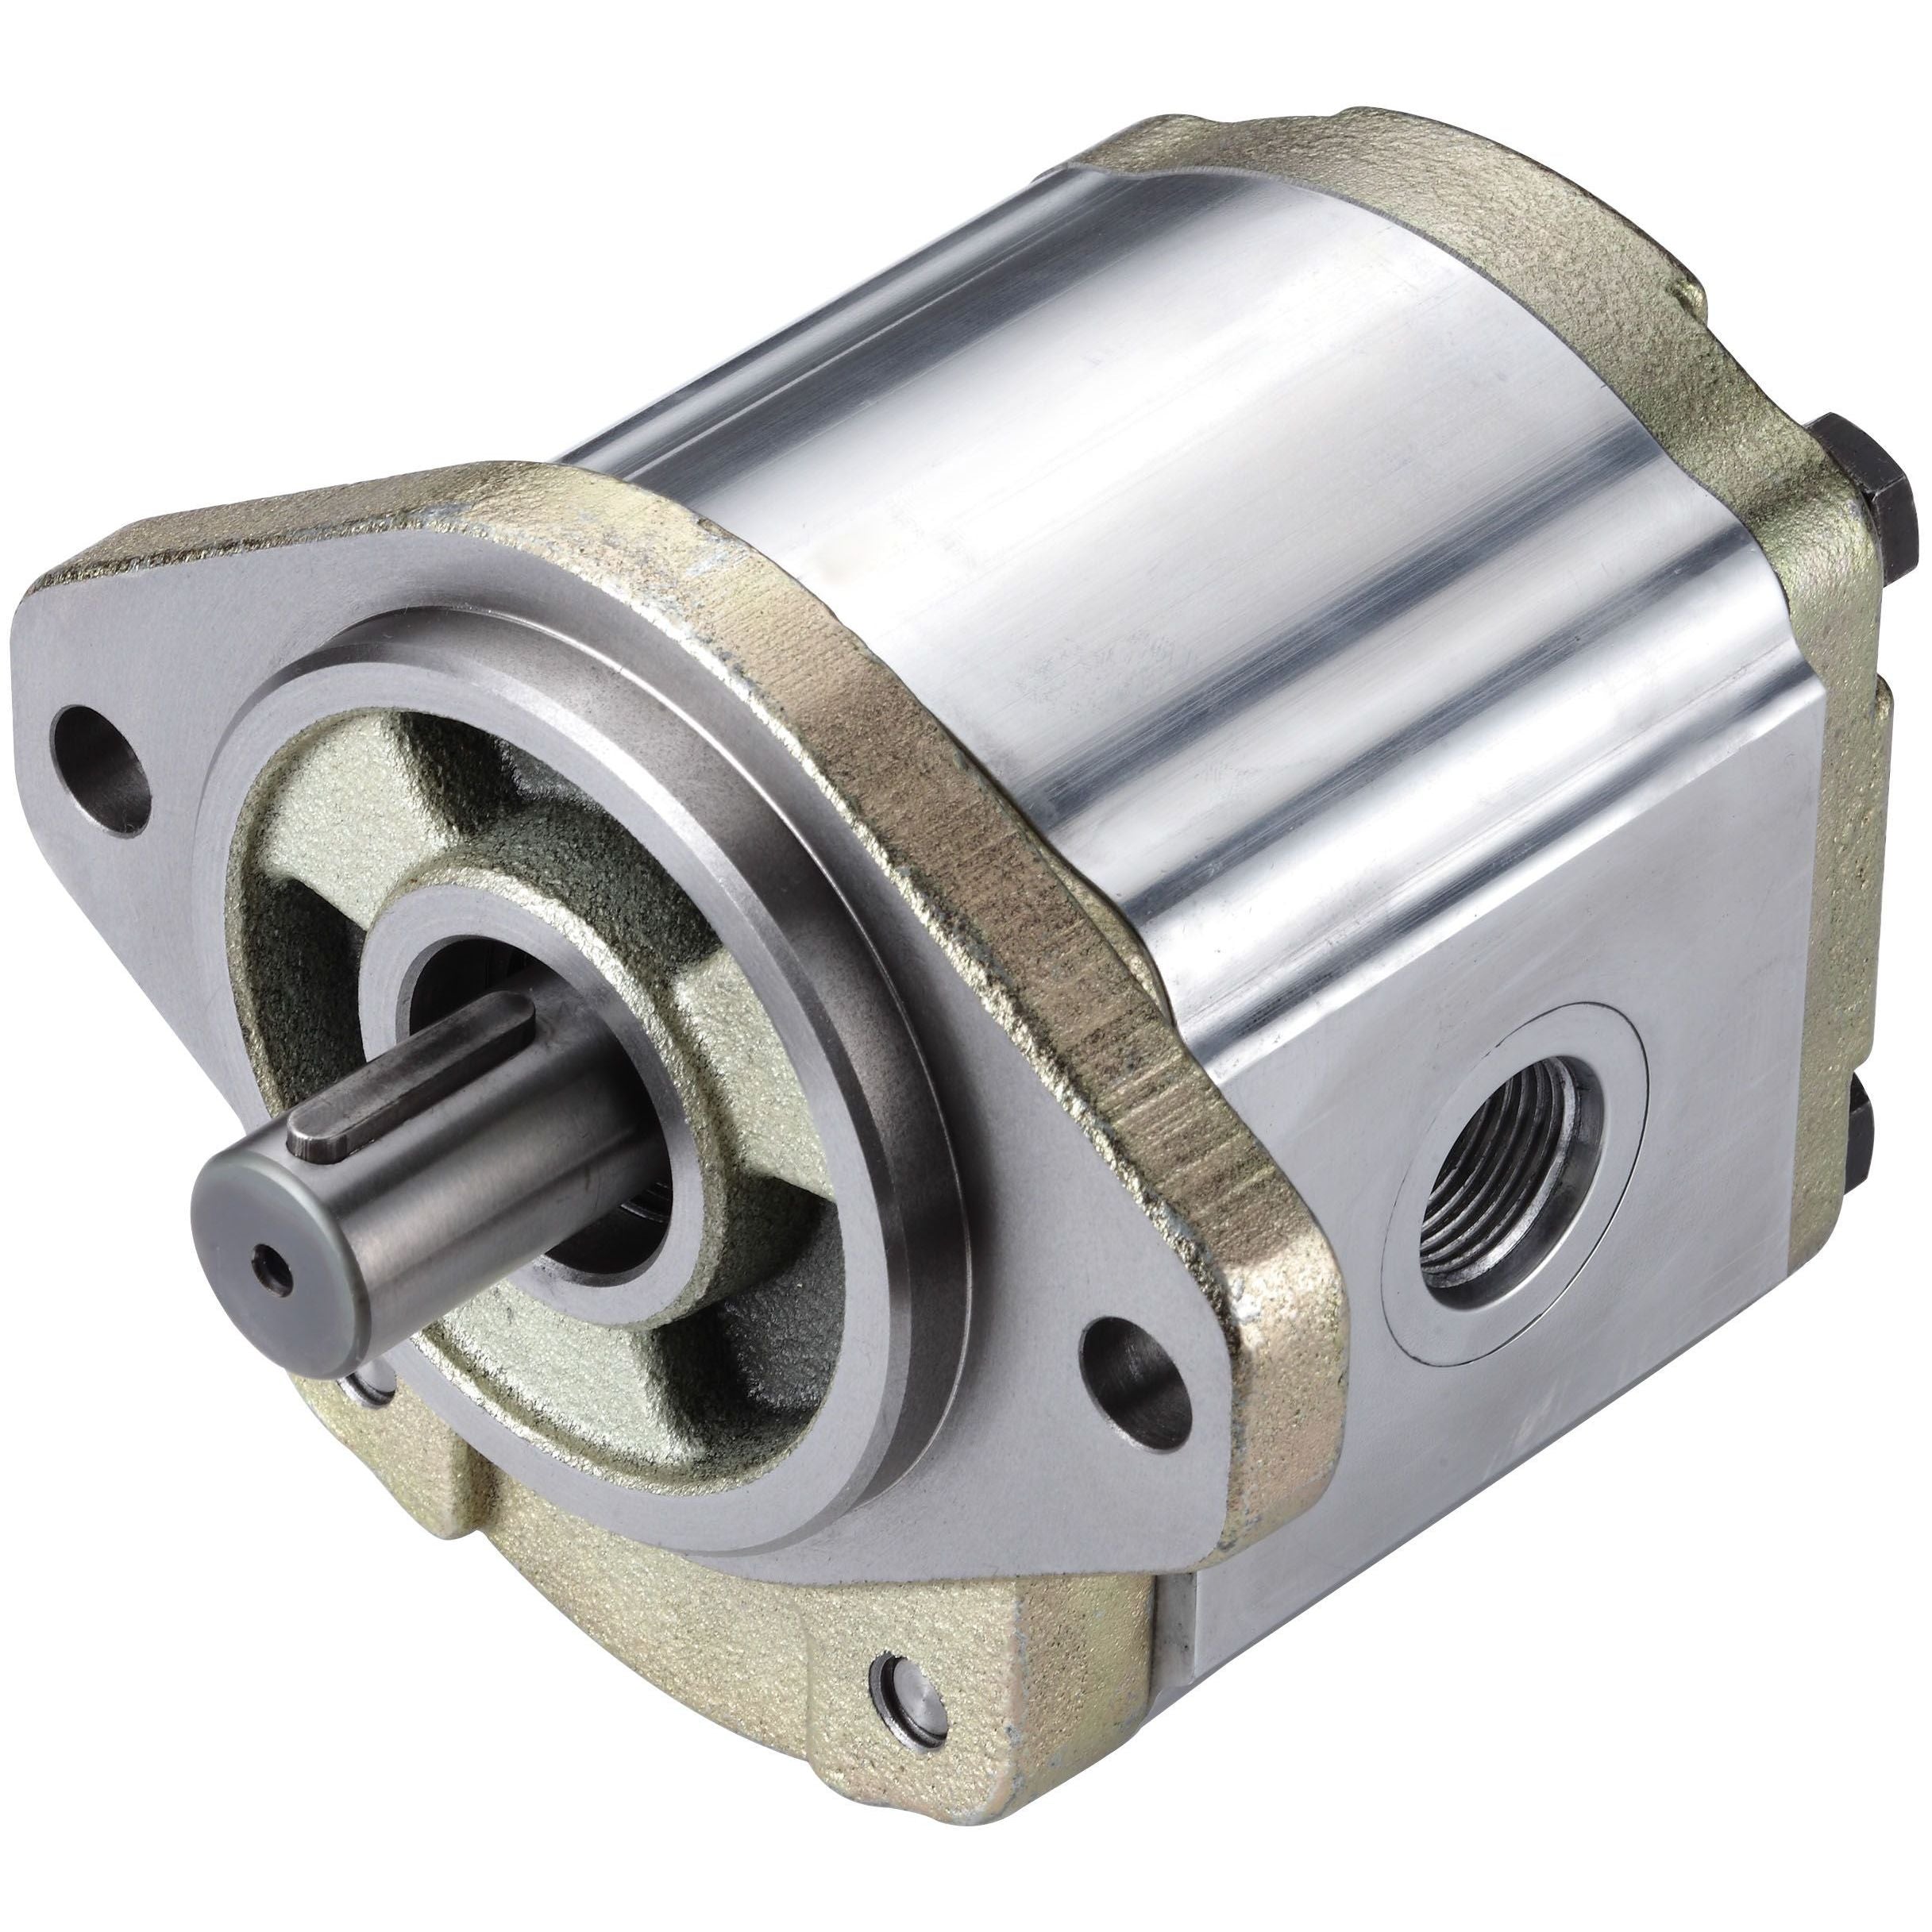 3GB8U128R : Honor Gear Pump, CW Rotation, 28cc (1.71in3), 13.31 GPM, 3500psi, 3000 RPM, #16 SAE (1") In, #16 SAE (1") Out, Splined Shaft 13-Tooth, 16/32 Pitch, SAE B 2-Bolt Mount